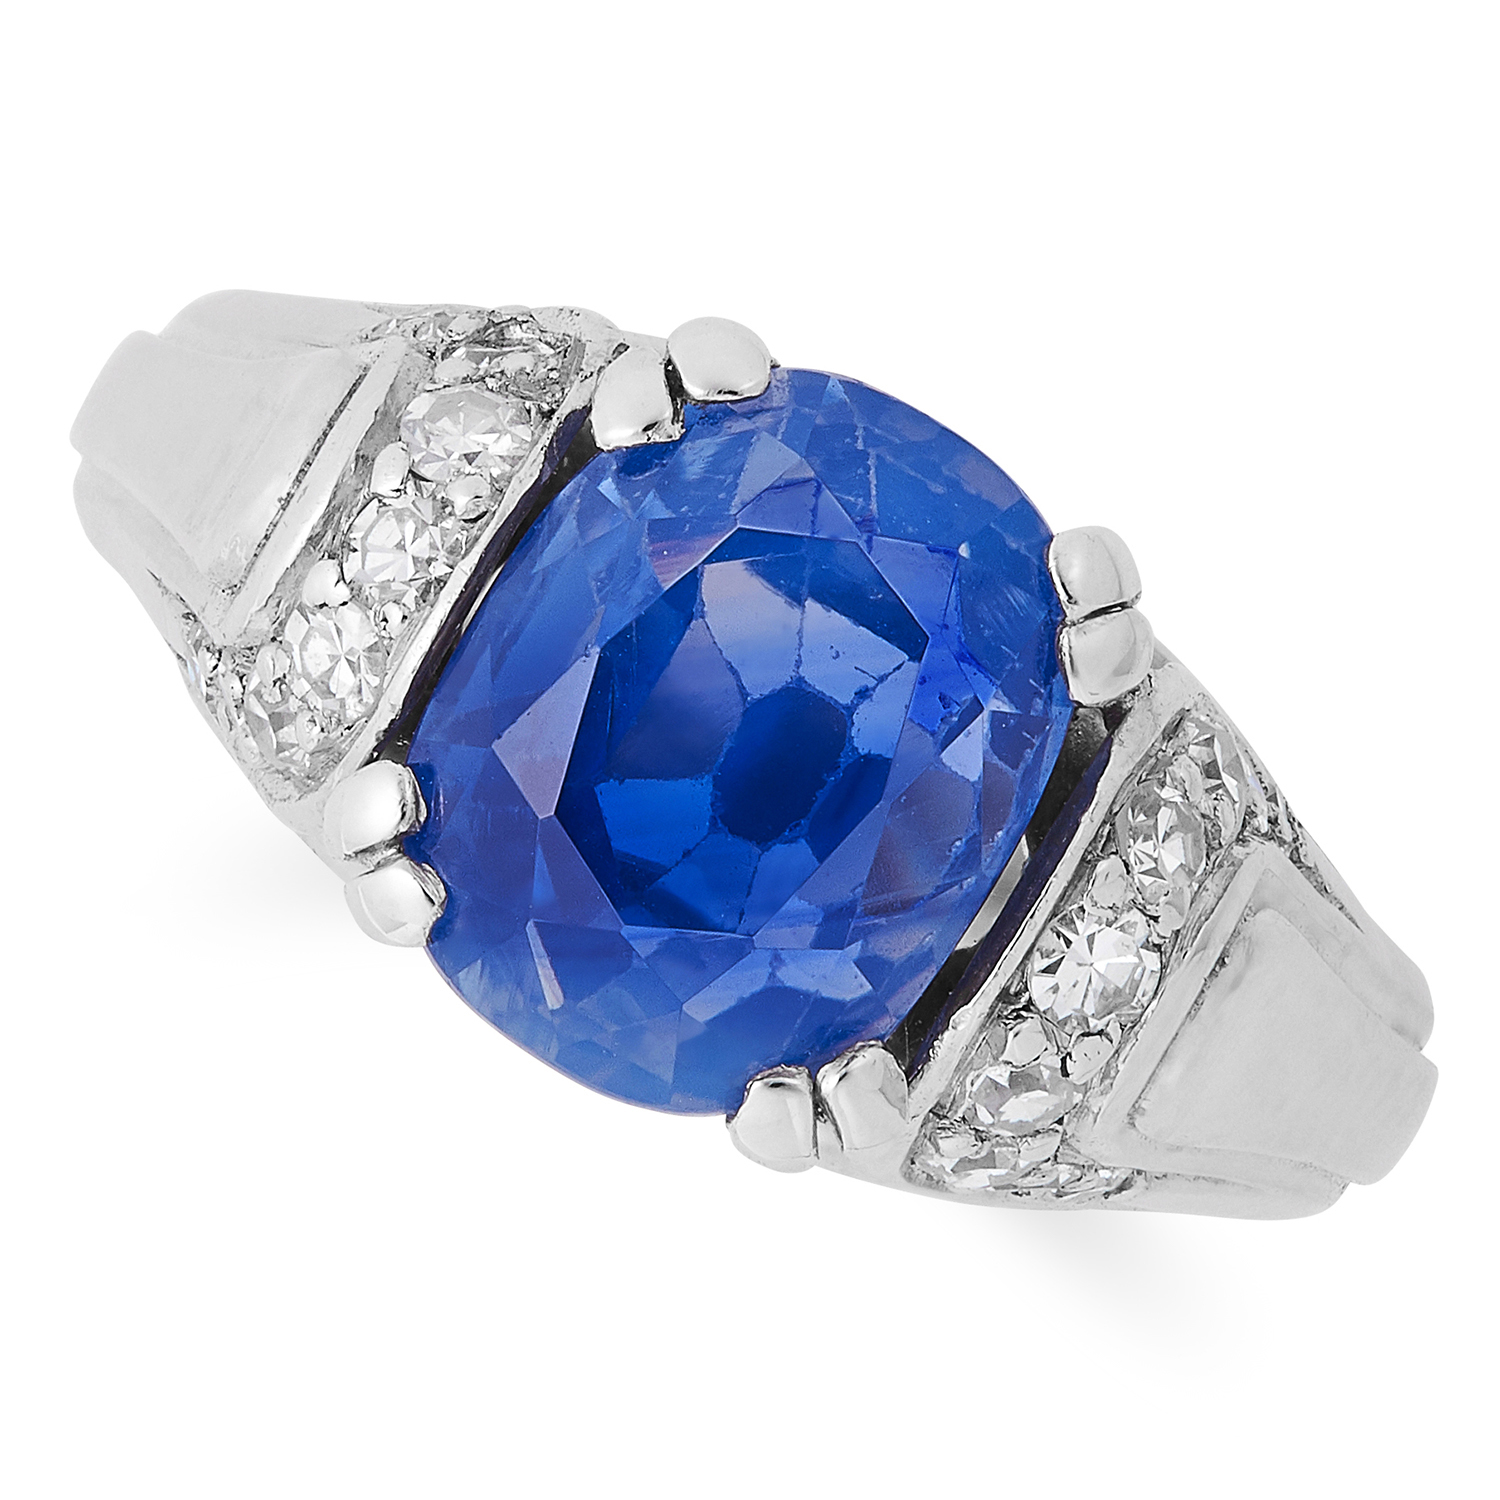 A 4.72 CARAT KASHMIR SAPPHIRE AND DIAMOND RING set with a cushion cut sapphire of 4.72 carats and